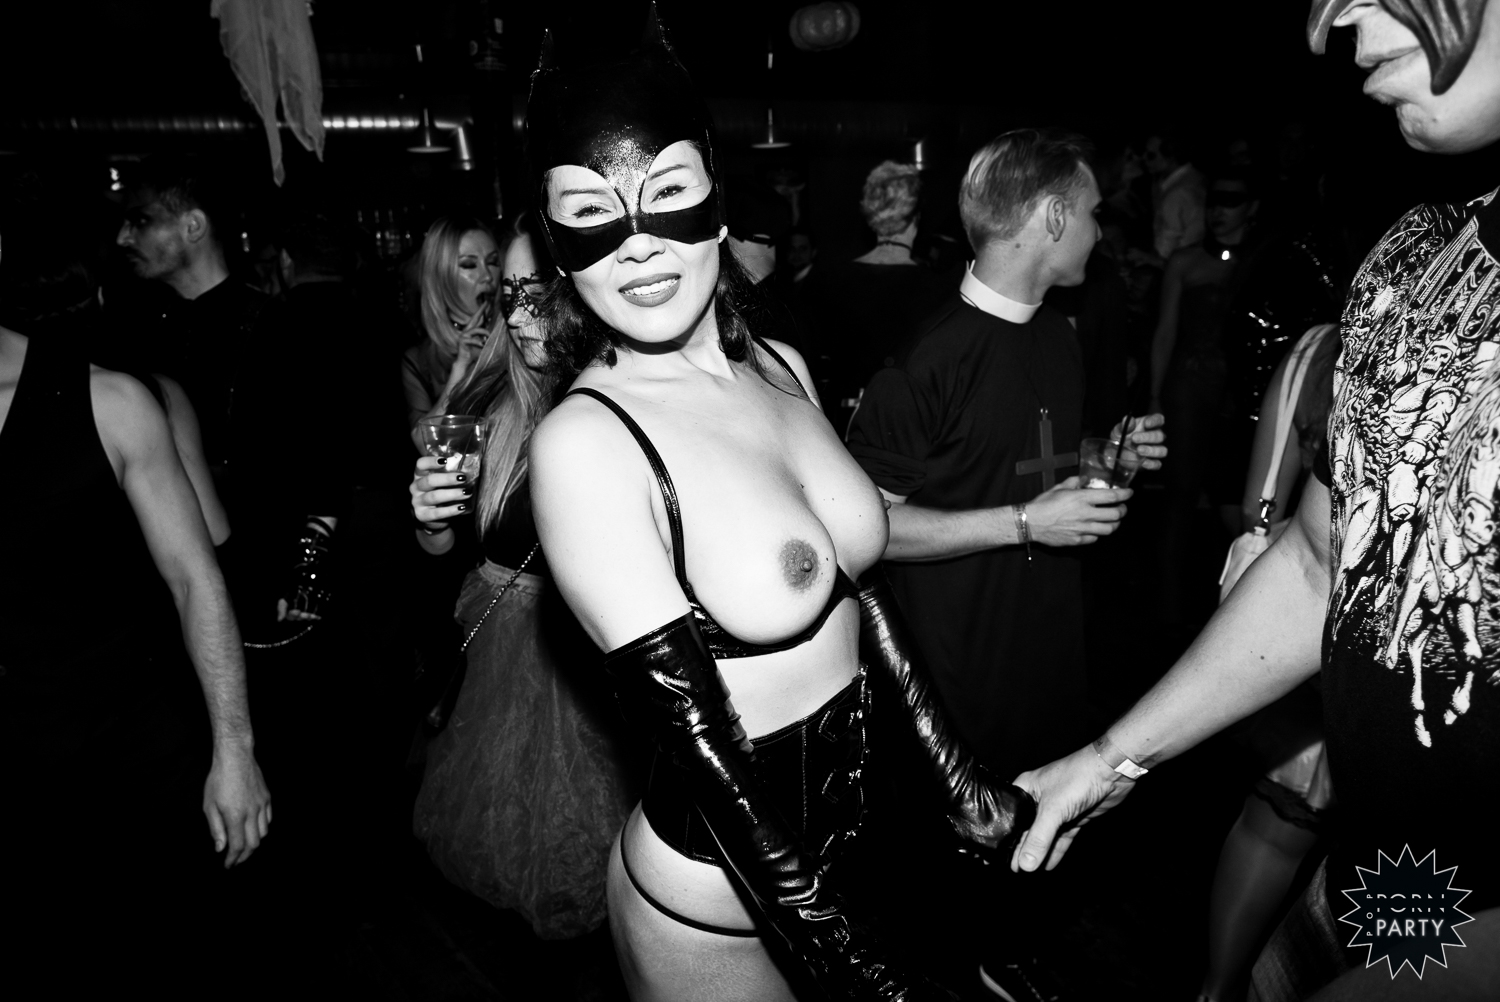 Naked at halloween party